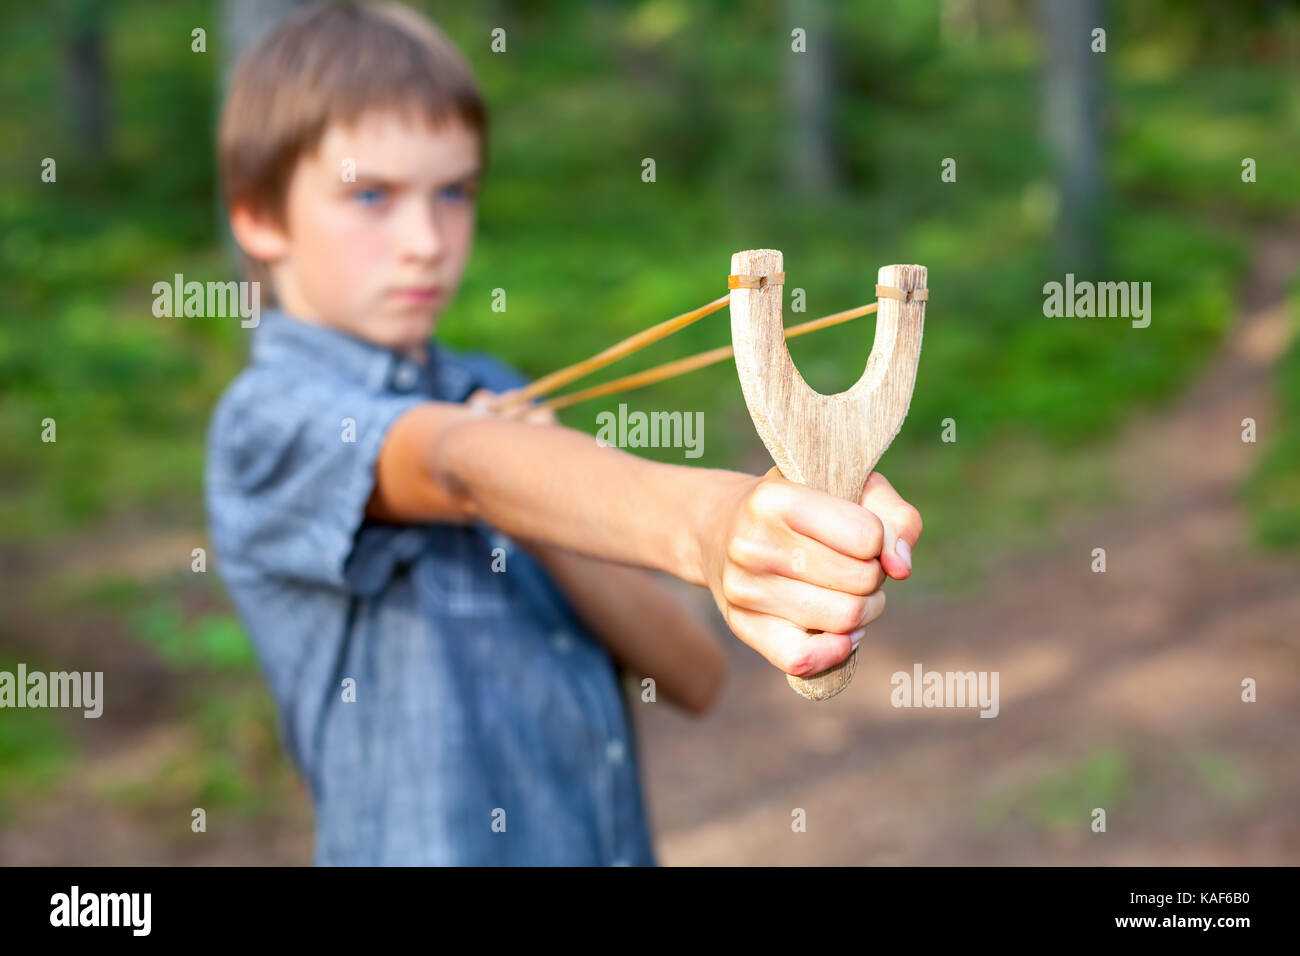 Boy aiming wooden slingshot outdoors, , focus on a slingshot face is blurred Stock Photo